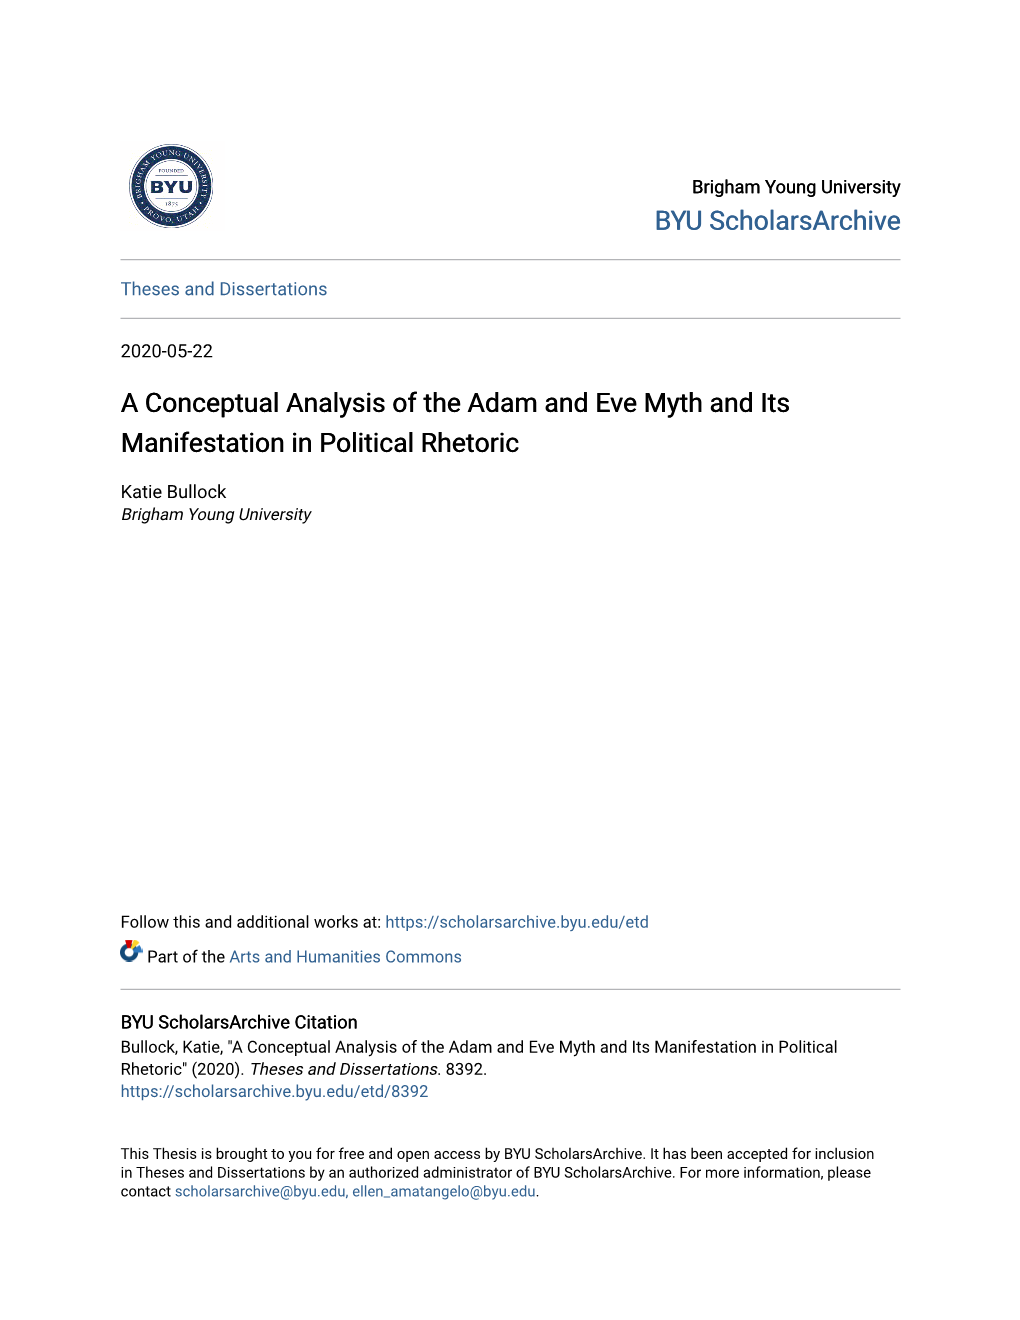 A Conceptual Analysis of the Adam and Eve Myth and Its Manifestation in Political Rhetoric